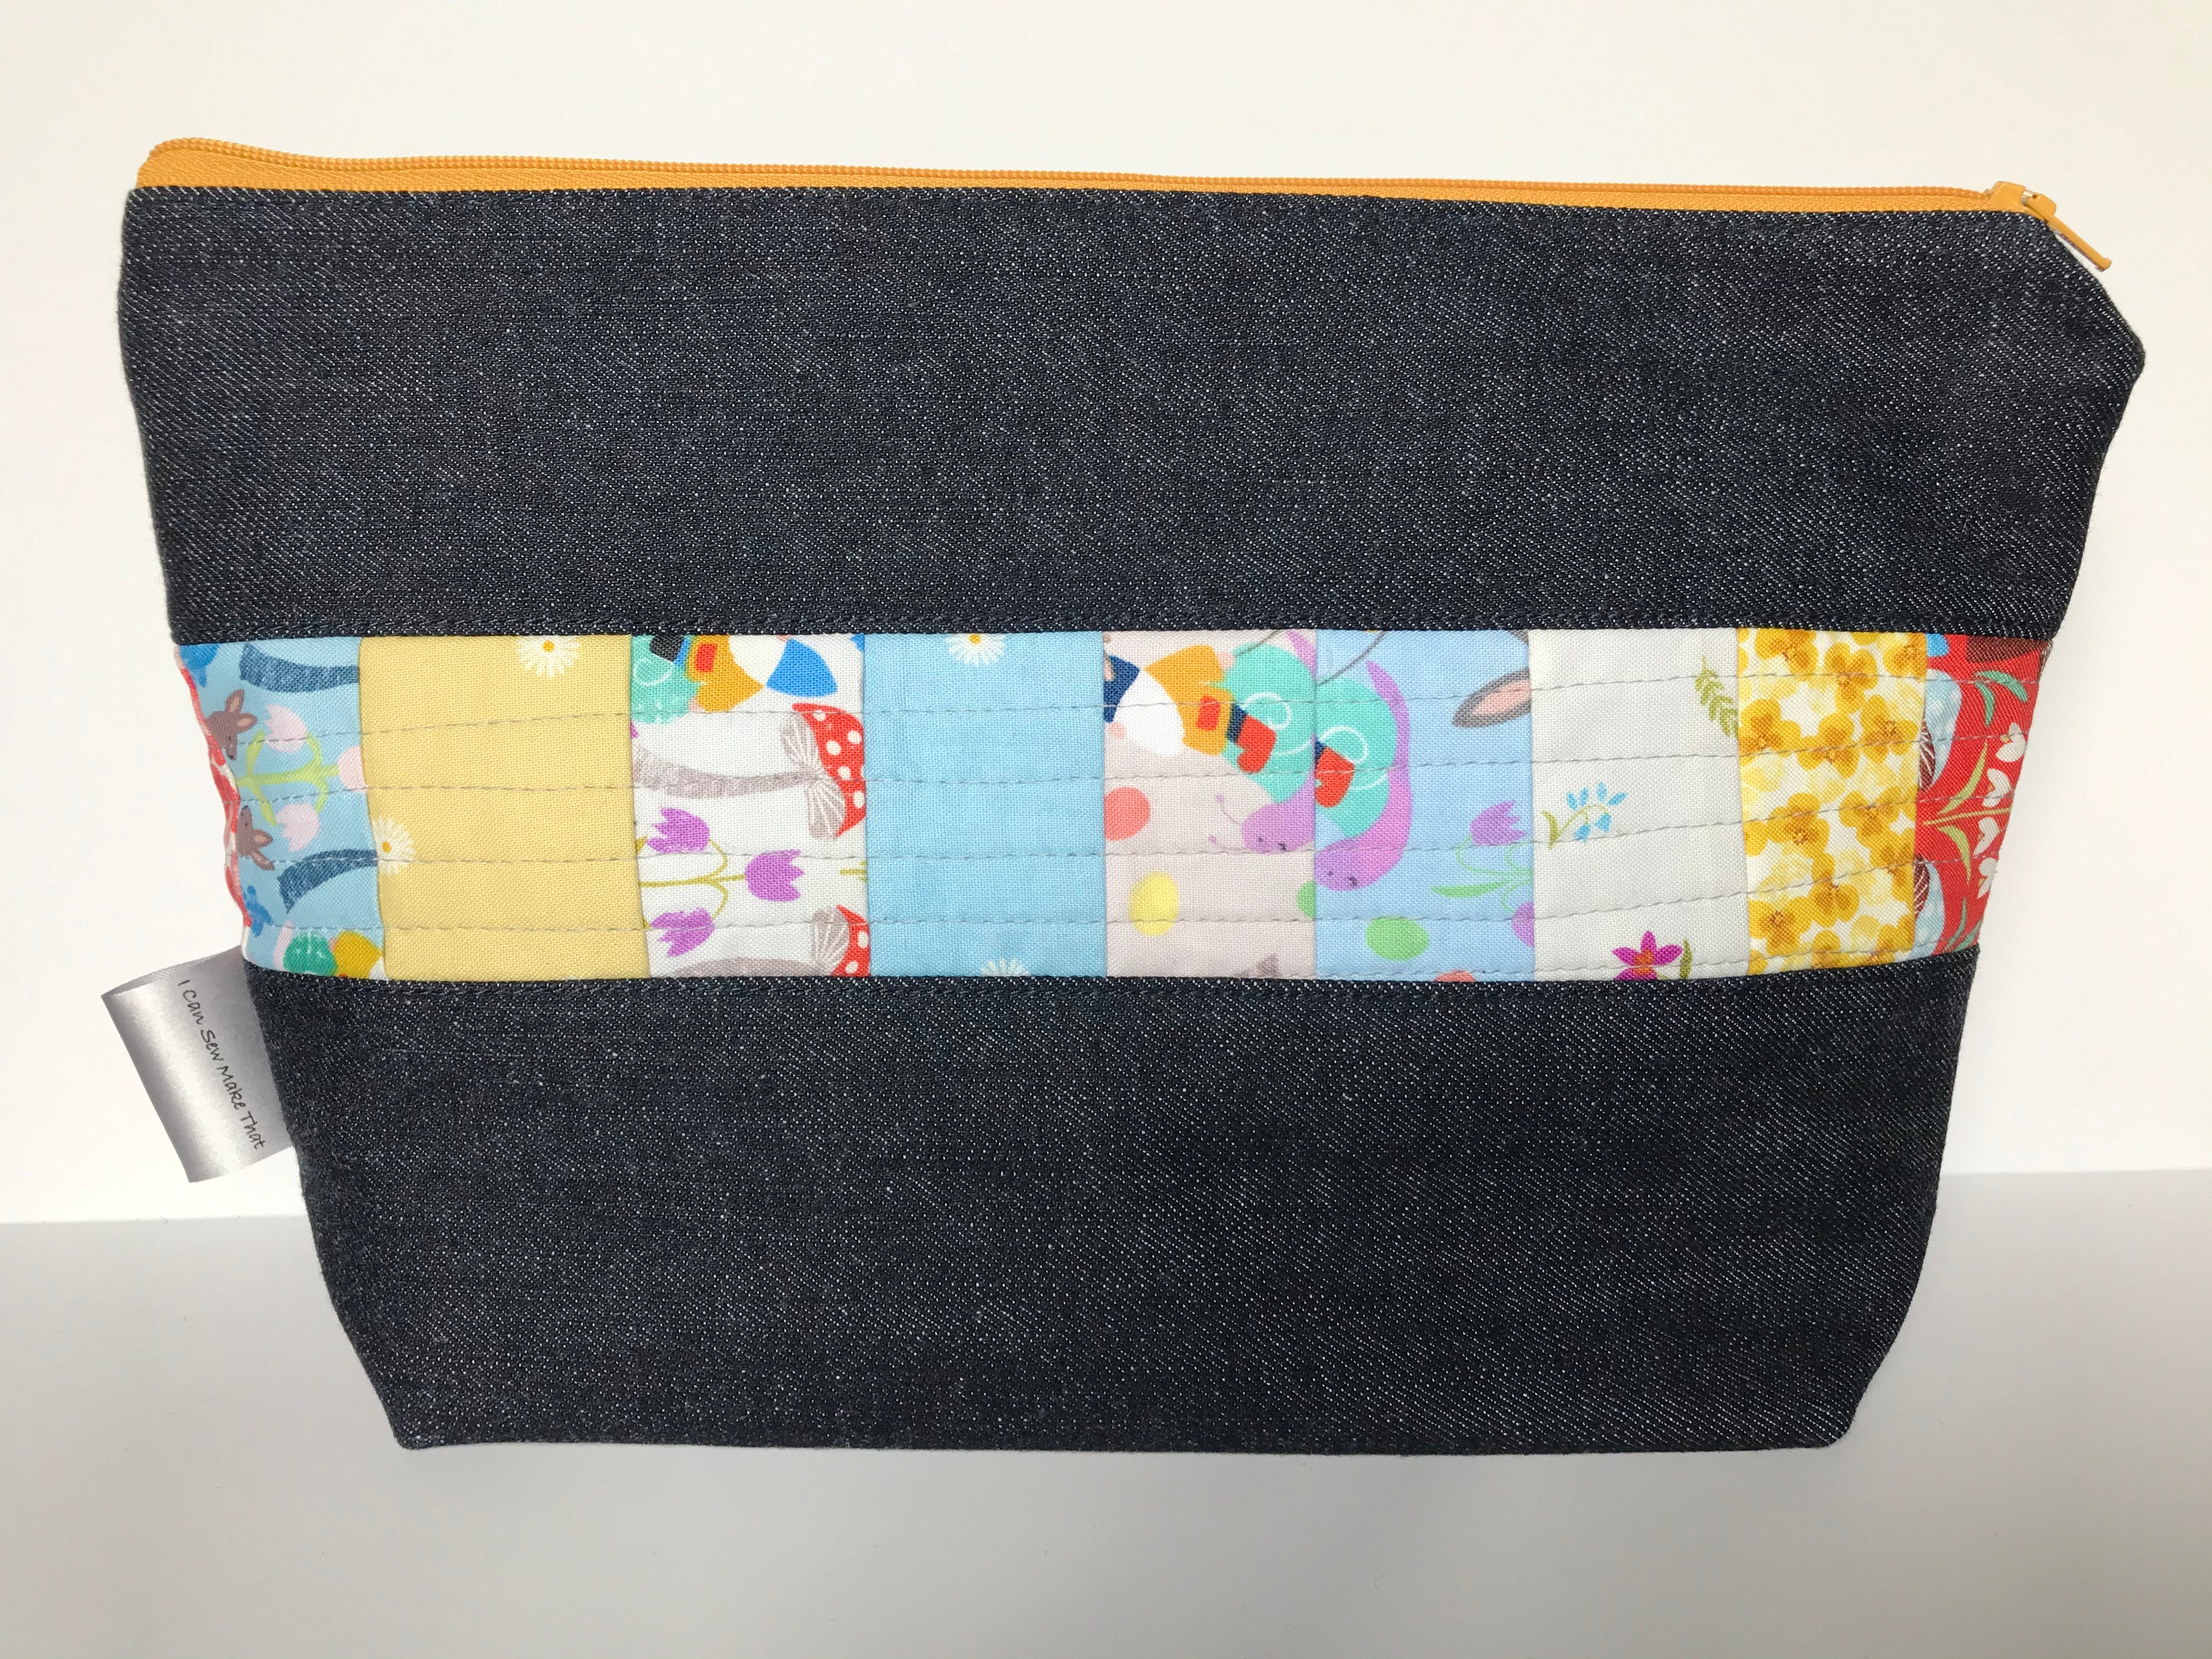 Denim - Small Zippered Project Bag - Gnomes & Mushrooms Quilted Fabric Panel